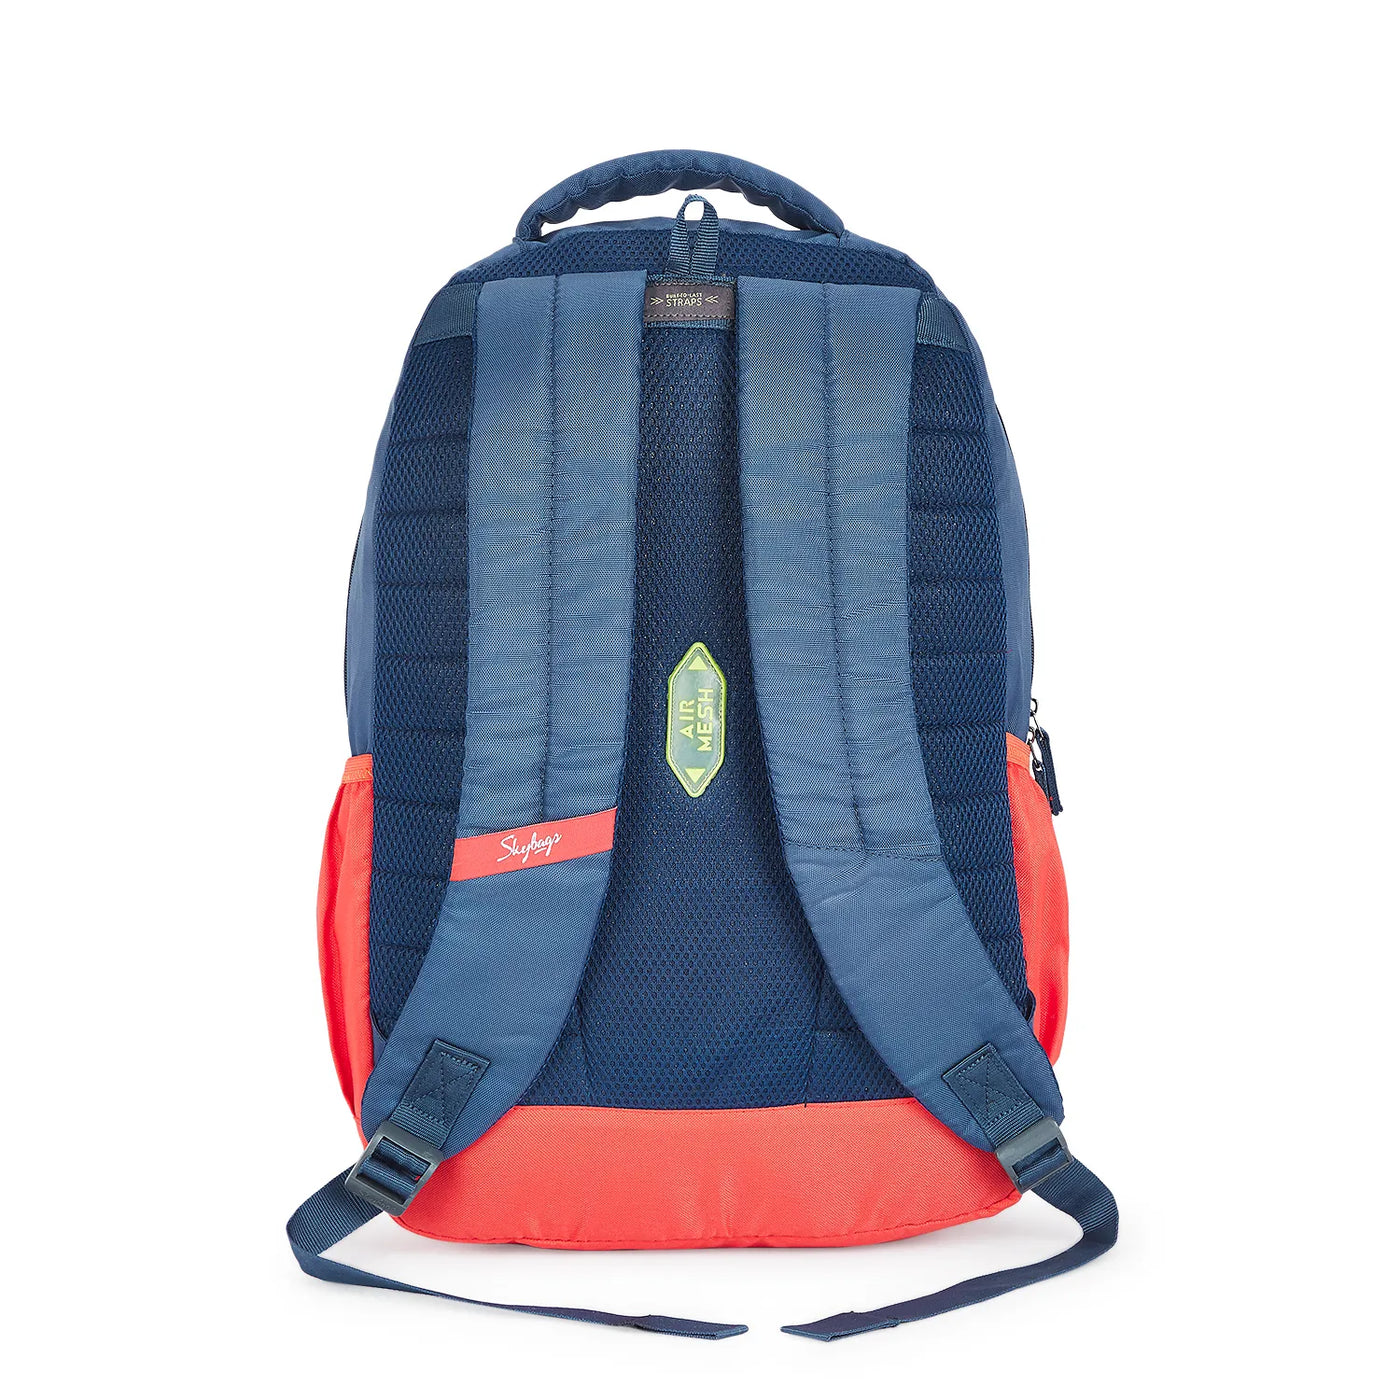 SKYBAGS BFF "2 BACKPACK RED"